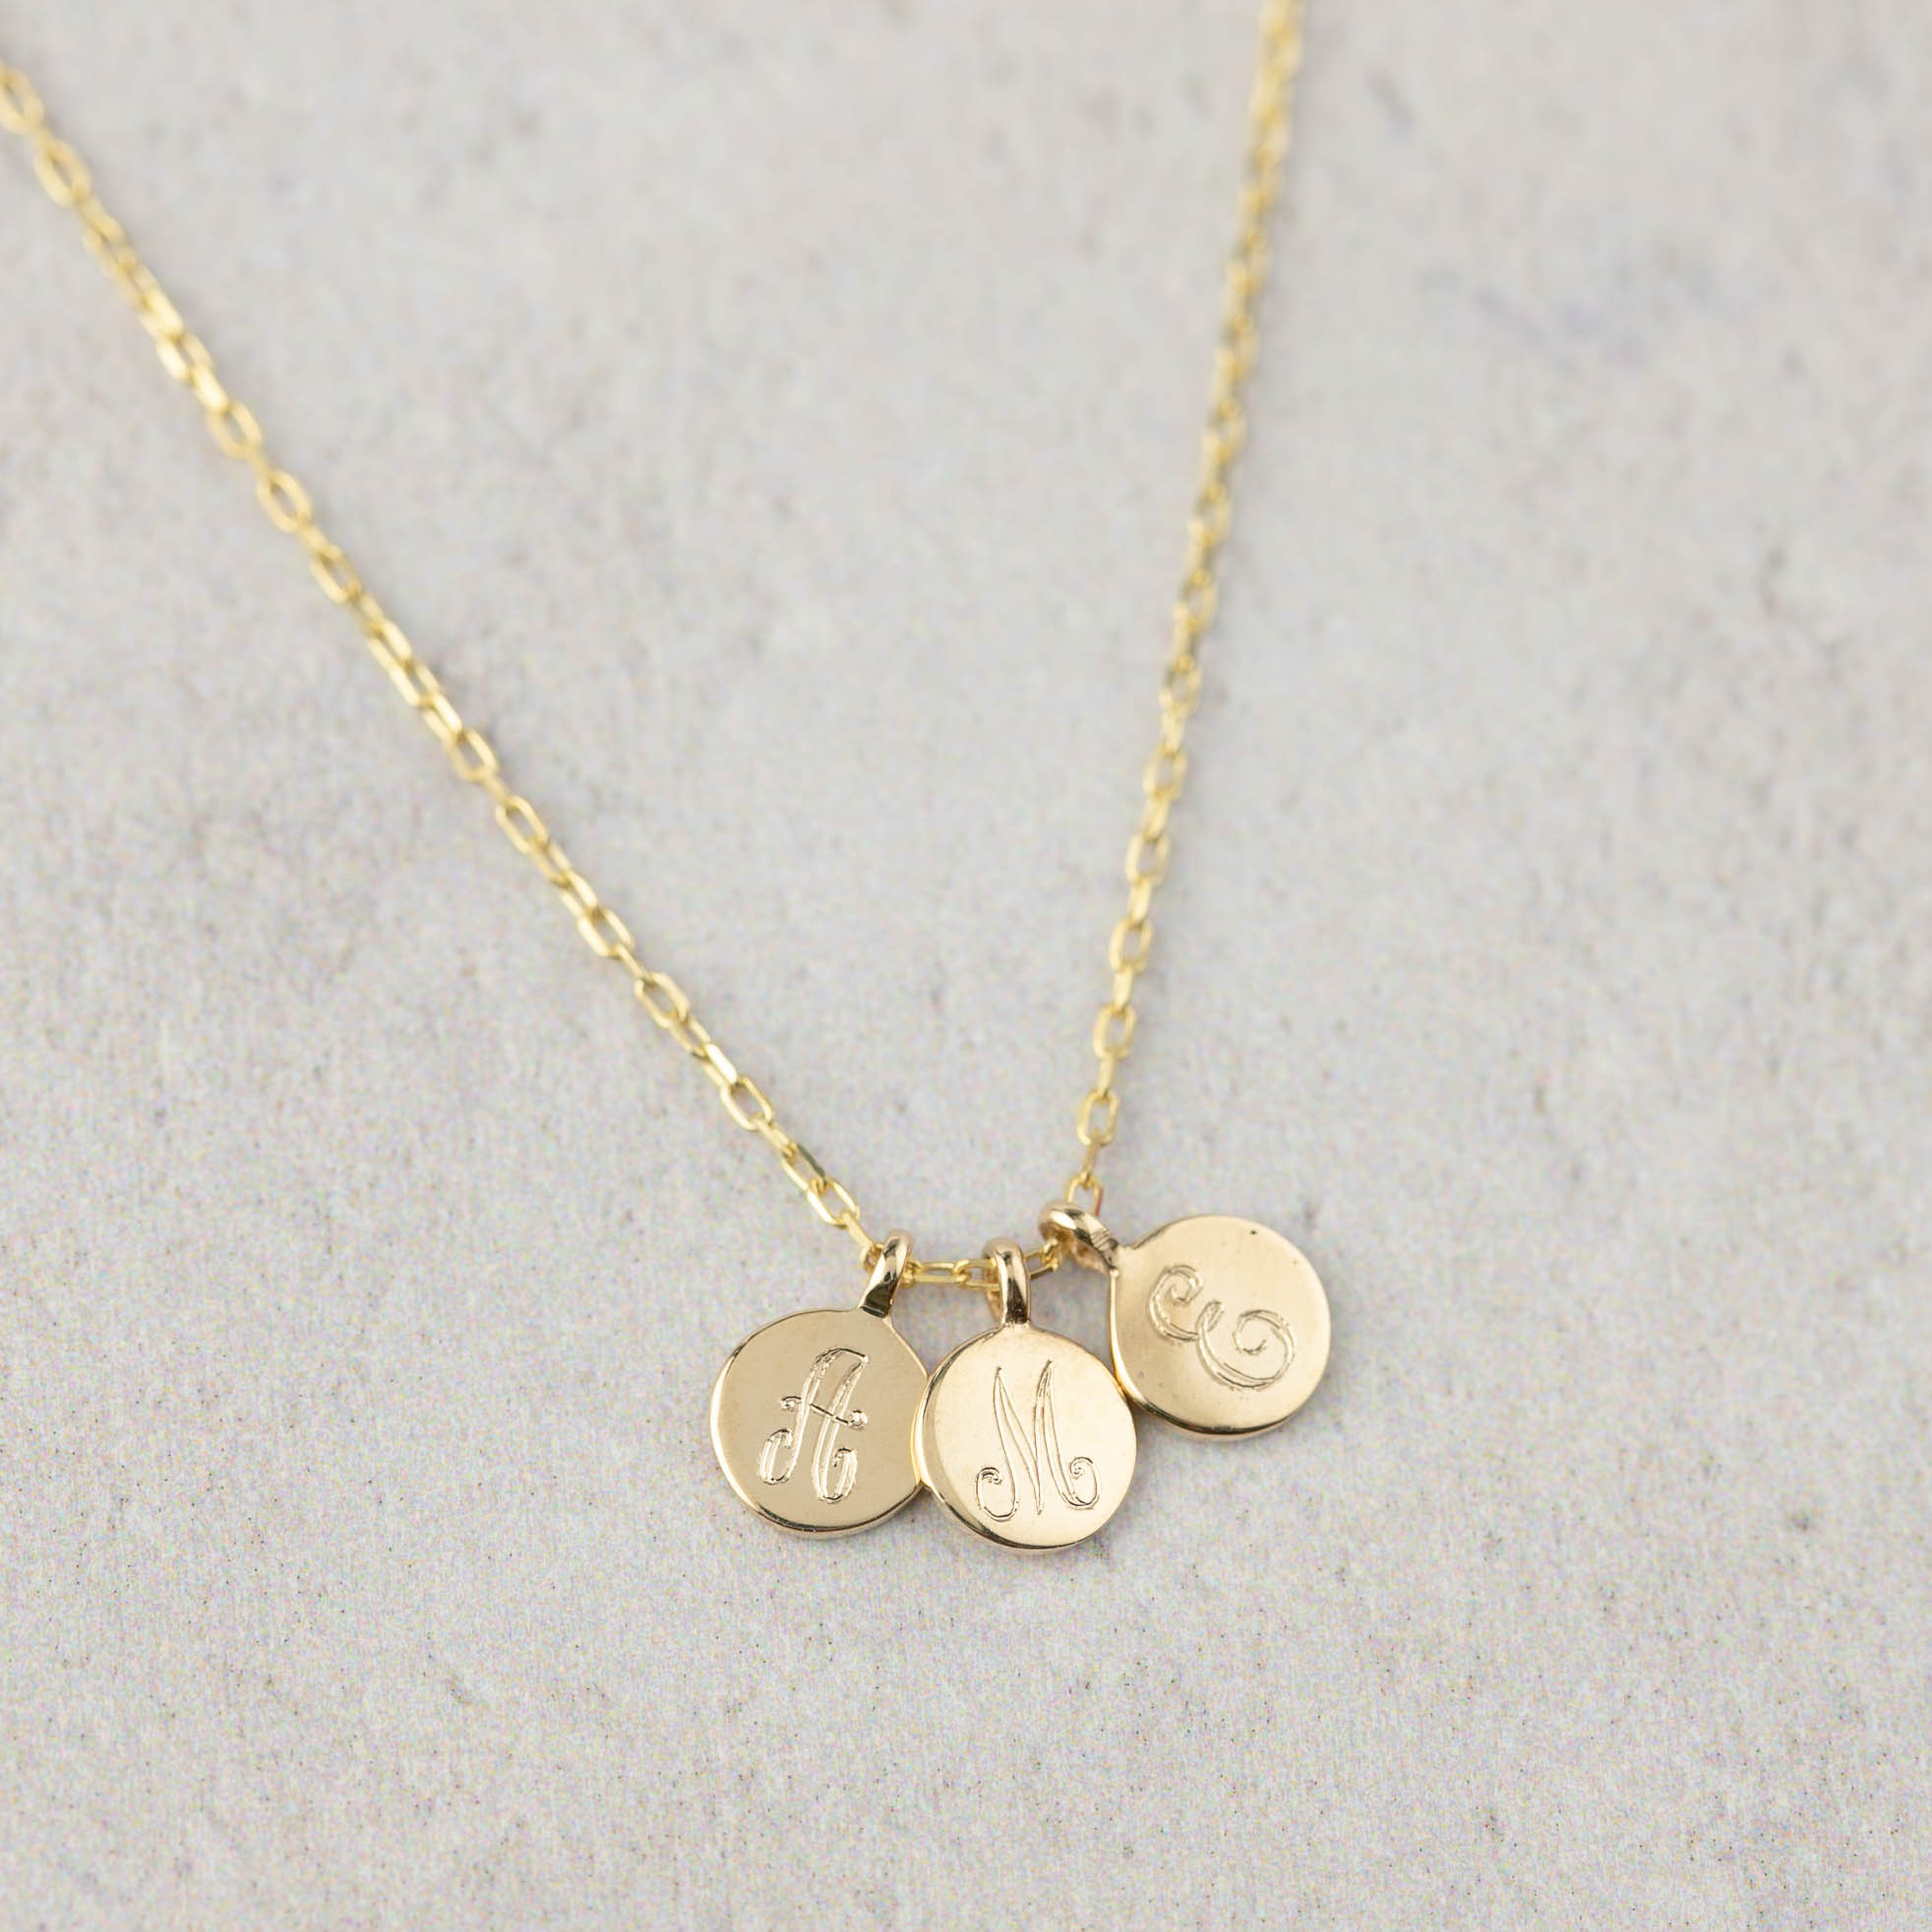 Family Name Necklace / 14k Gold Family Tree Necklace / Diamond Disc Necklace  / Multiple Names Necklace / Personalized Necklace /Gift for her